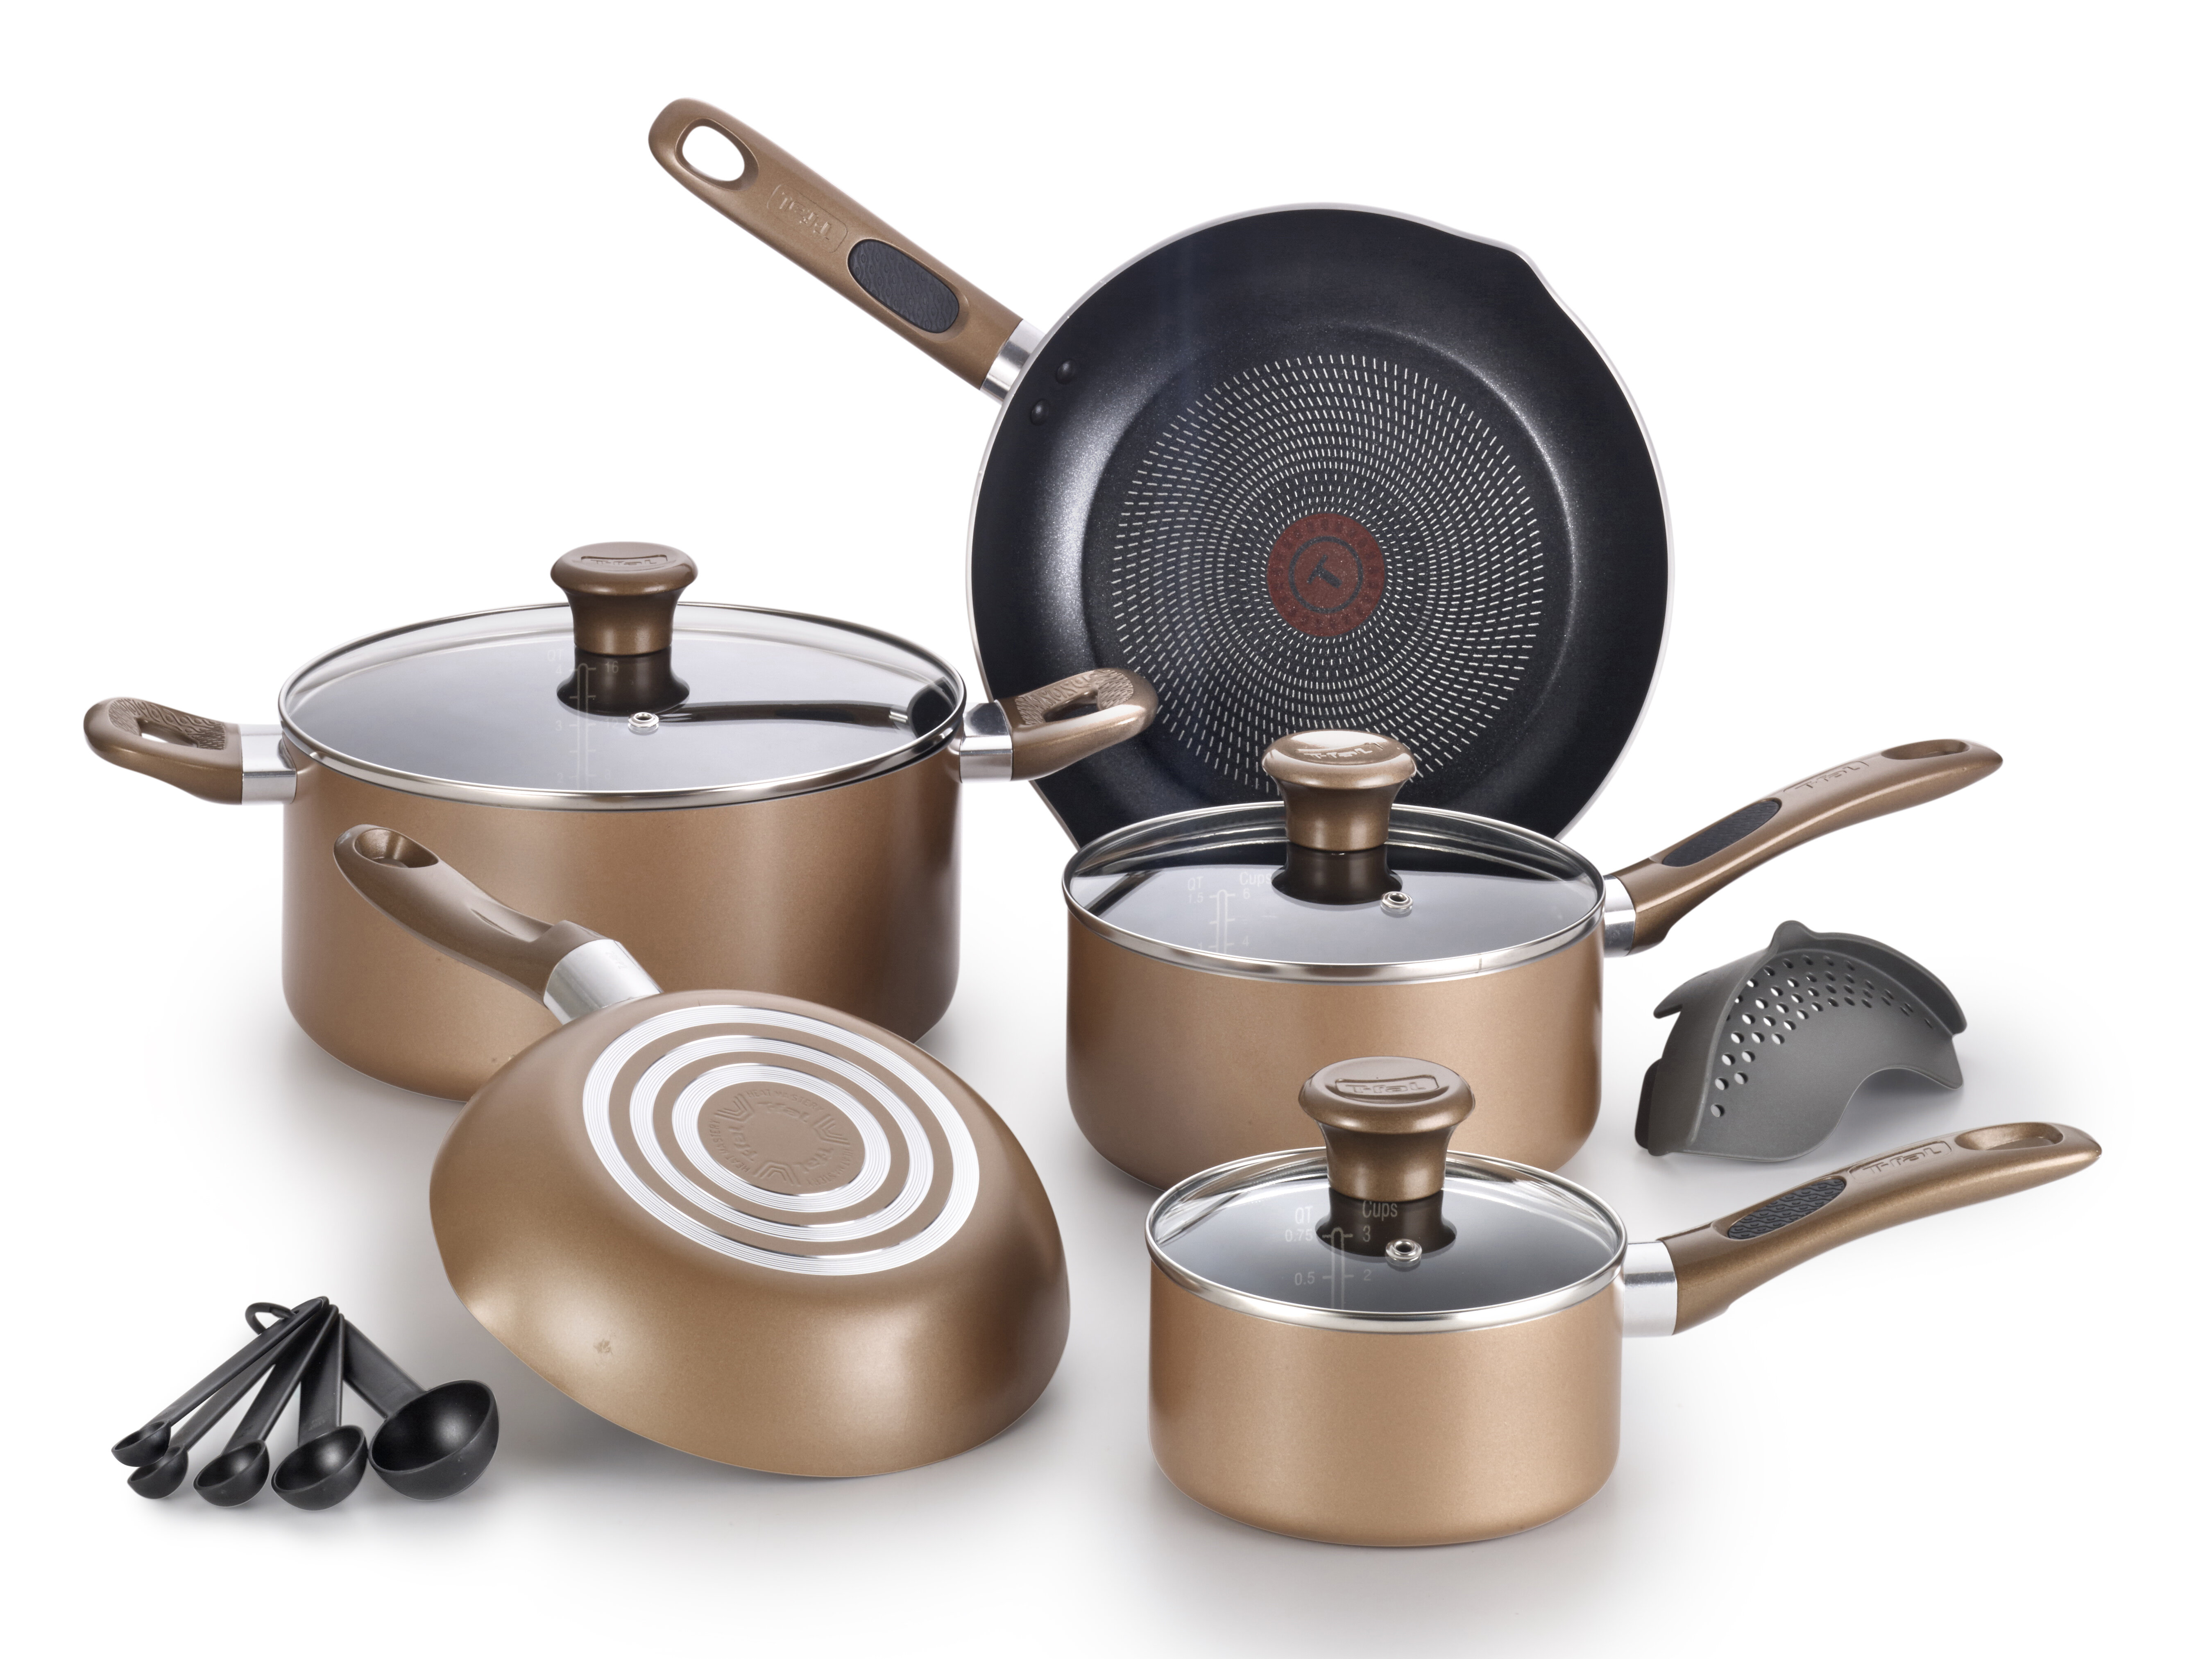 5 Piece Cast Iron Cookware Set Members Mark for Sale in Los